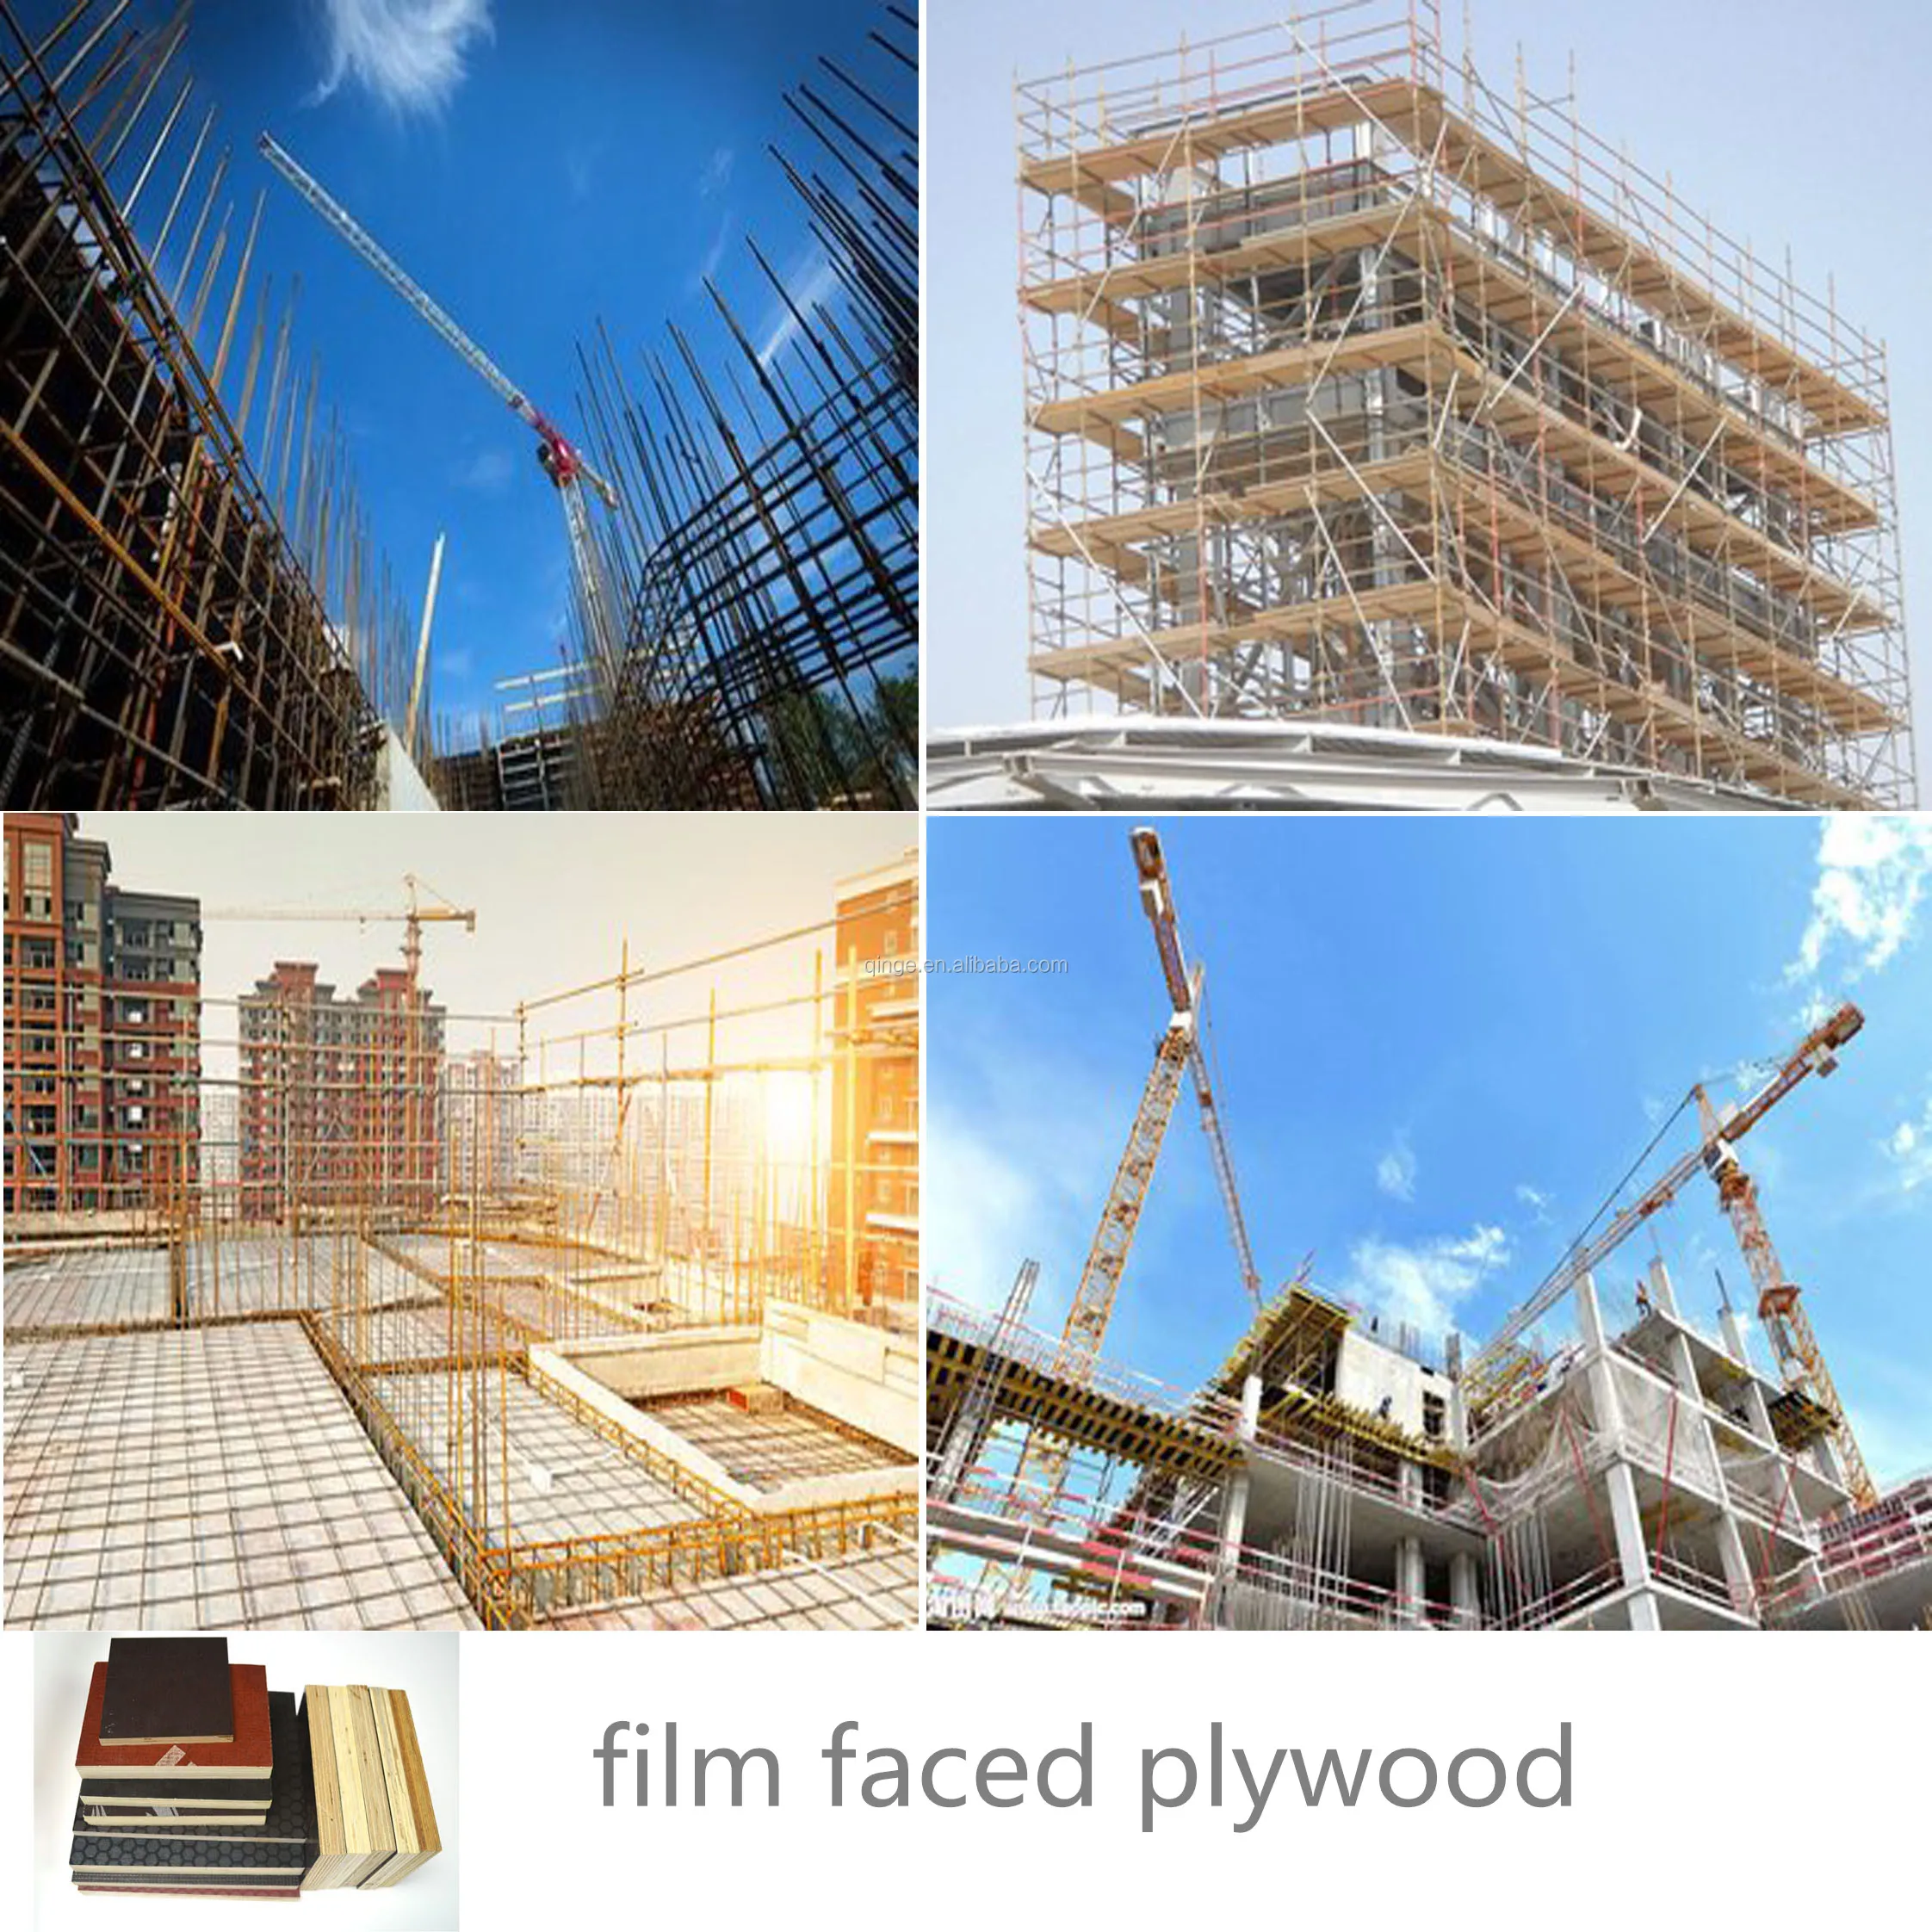 PIANO 15mm formwork in construction site film faced plywood weight importers in uae